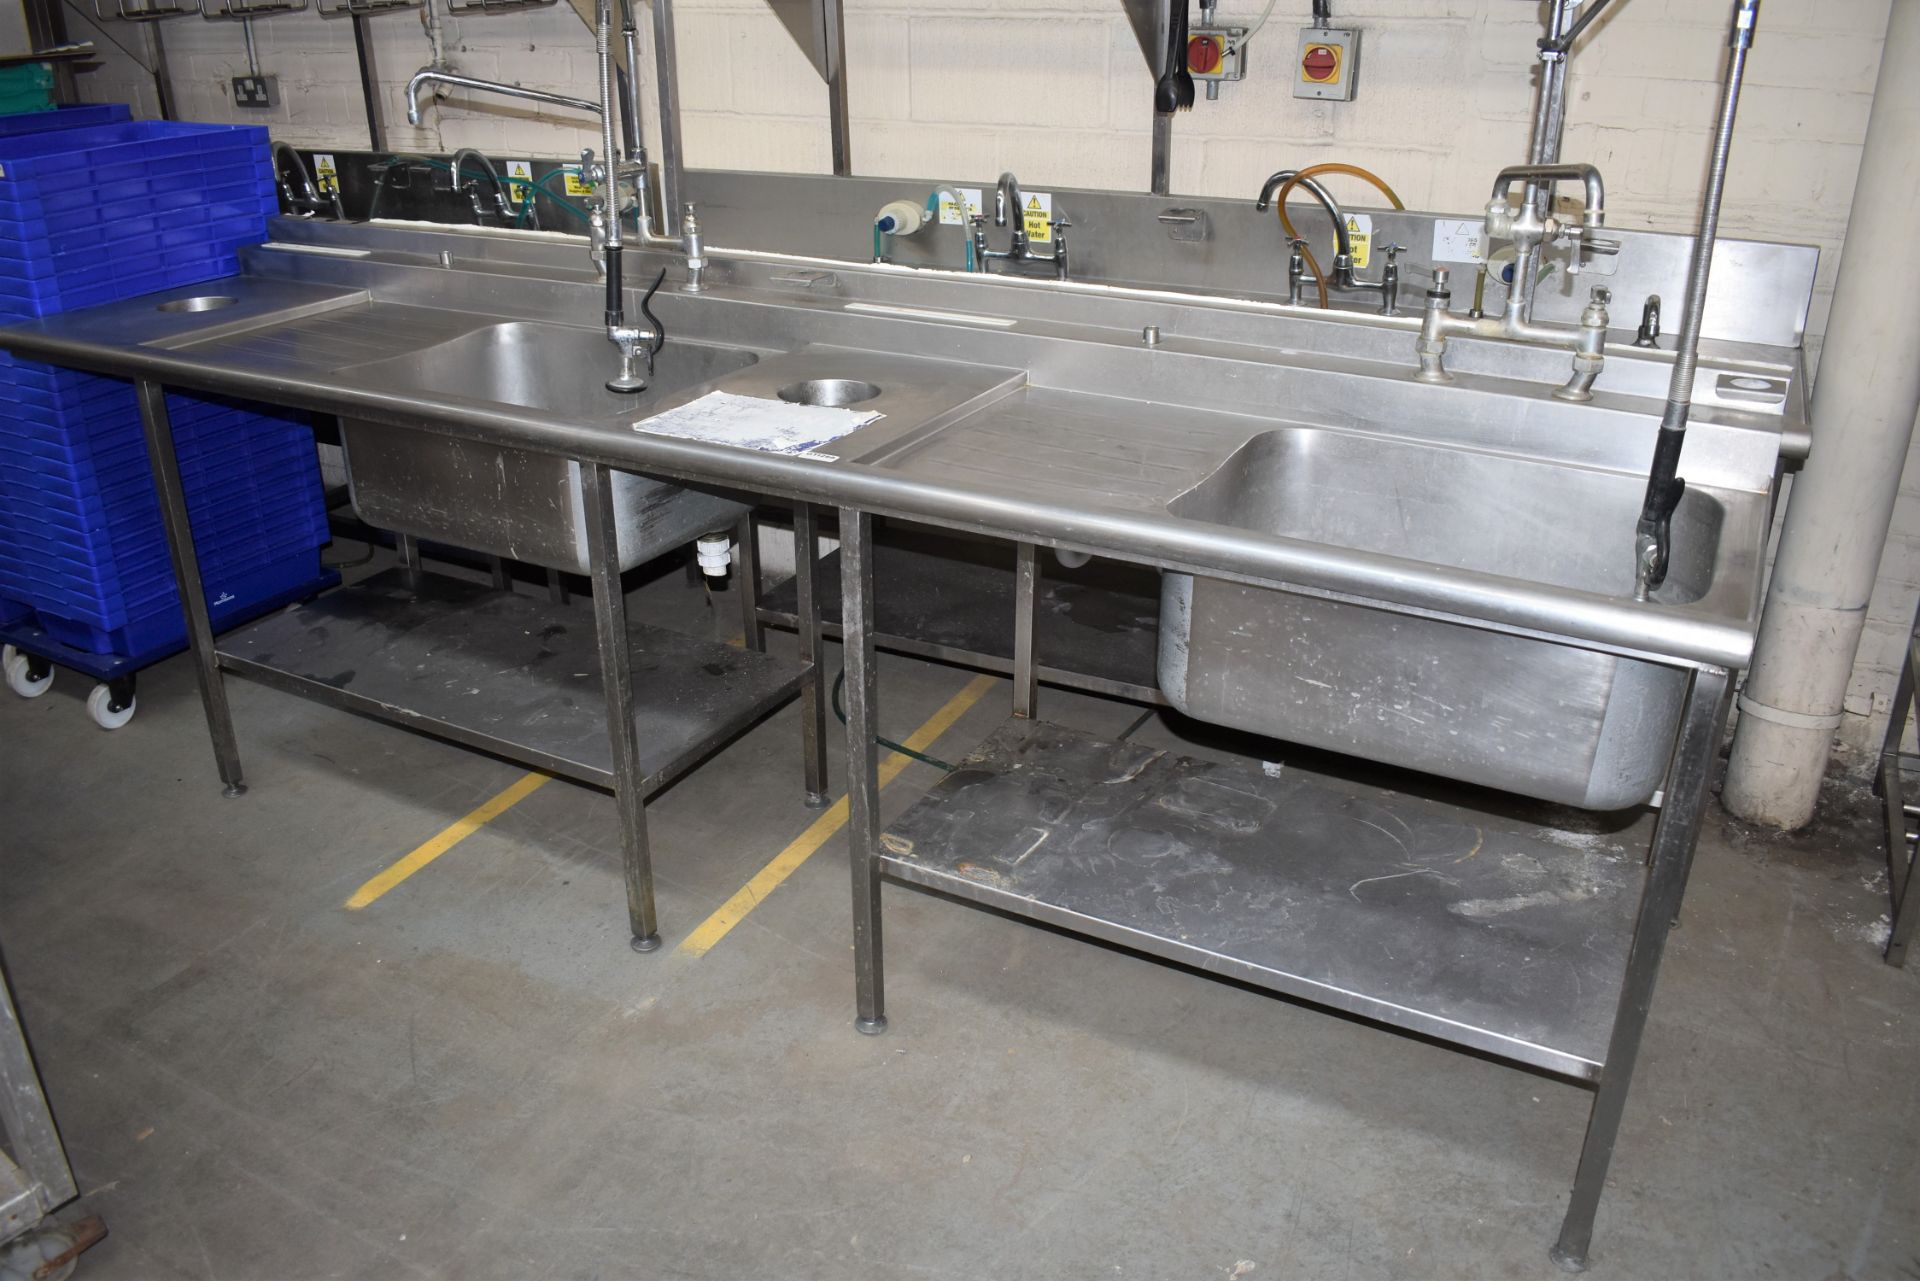 1 x Stainless Steel Commercial Wash Basin Unit With Twin Sink Bowl and Drainers, Mixer Taps, Spray H